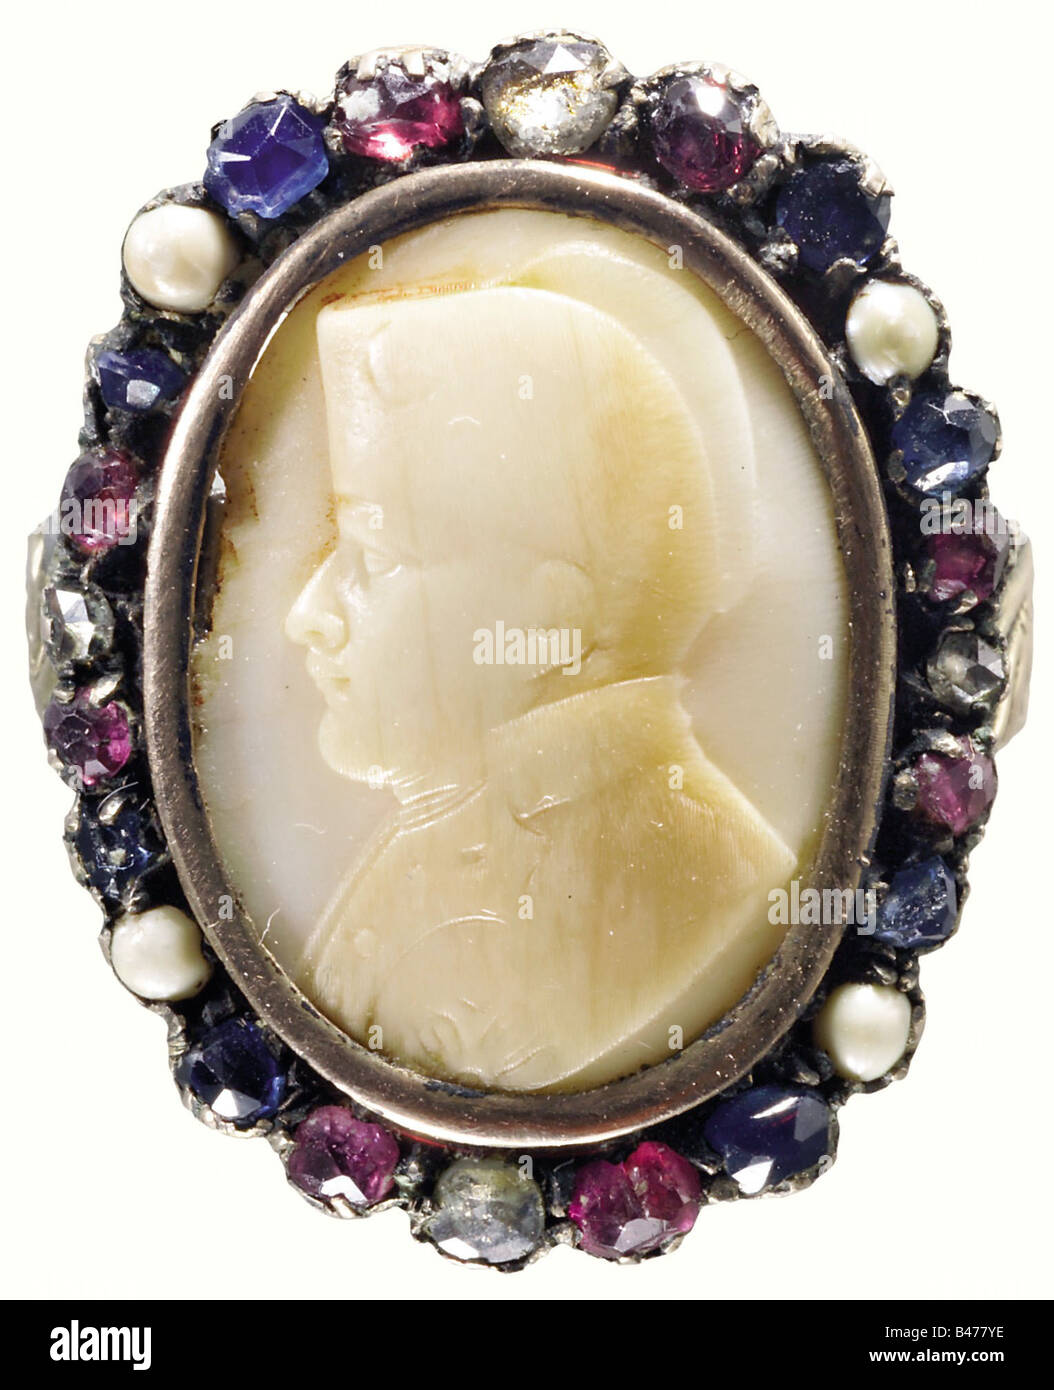 Napoleon I, a ring with a carved ivory portrait of the Emperor. A relief carved, ivory cameo with a profile portrait of Napoleon, set in gold, surrounded by a wreath of inset semi-precious stones and river pearls in the French national colours. Several repairs. From the possession of Count Edouard de Monteglas, purchased in 1885. See Hermann Historica, Auction 19, October 1988, Lot 2308, 4,800 DM (2,400 EUR), showing the documentation still available at that time. Presumably the work of the French cameo carver, engraver, and sculptor, Adolph David Bau, Artist's Copyright has not to be cleared Stock Photo